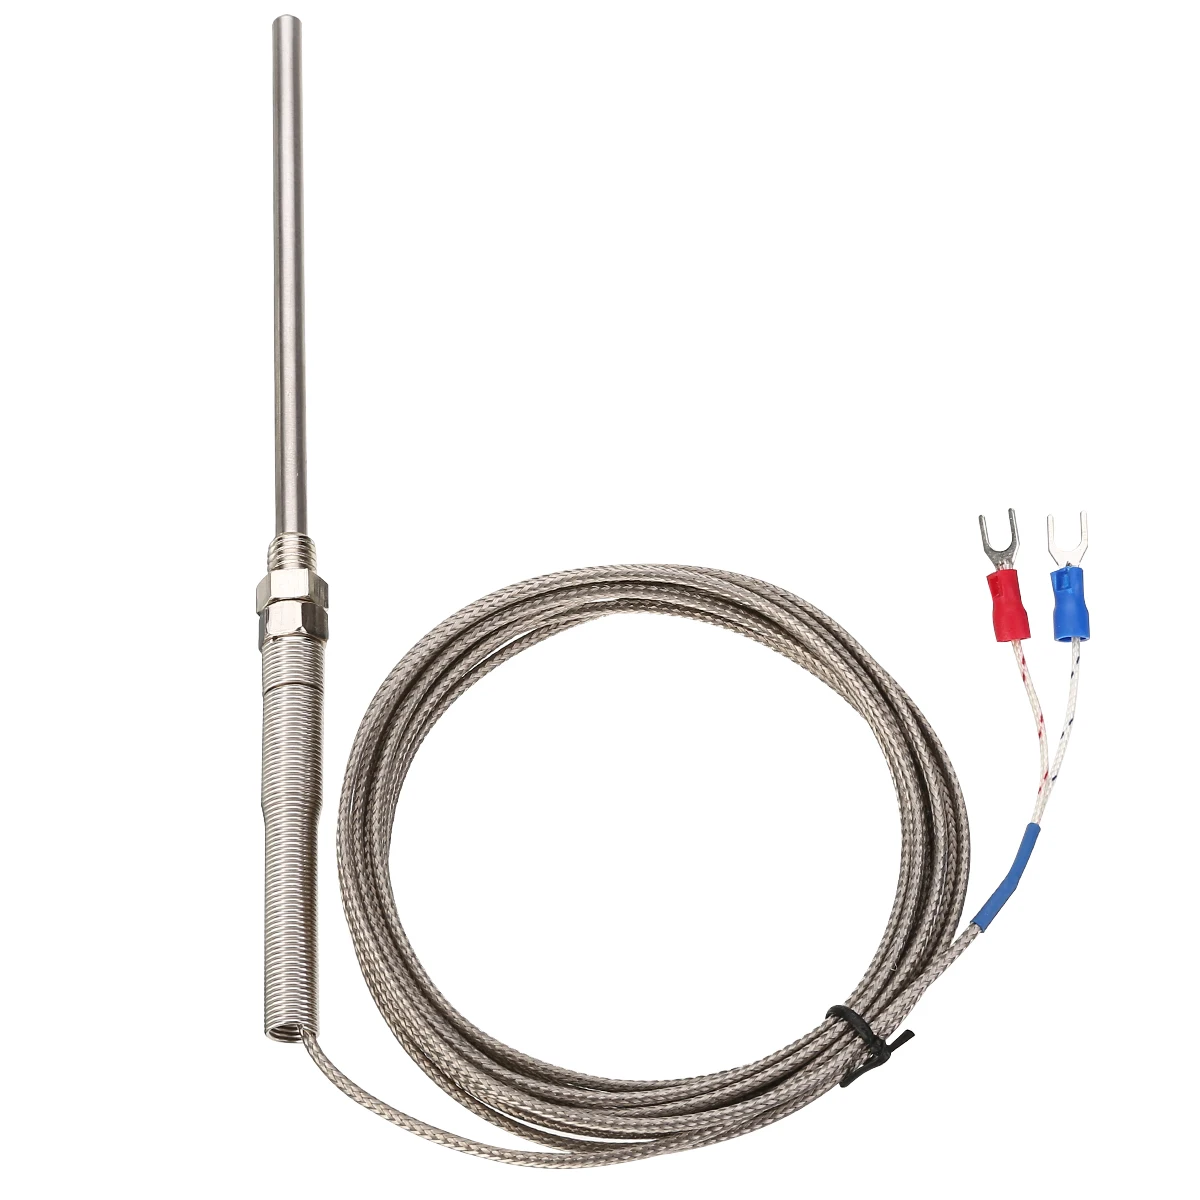 

0-400 Degree Celsius K Type Thermocouple Temperature Stainless Steel Sensor 100mm Probe 300cm Wire Cable Length Instrument